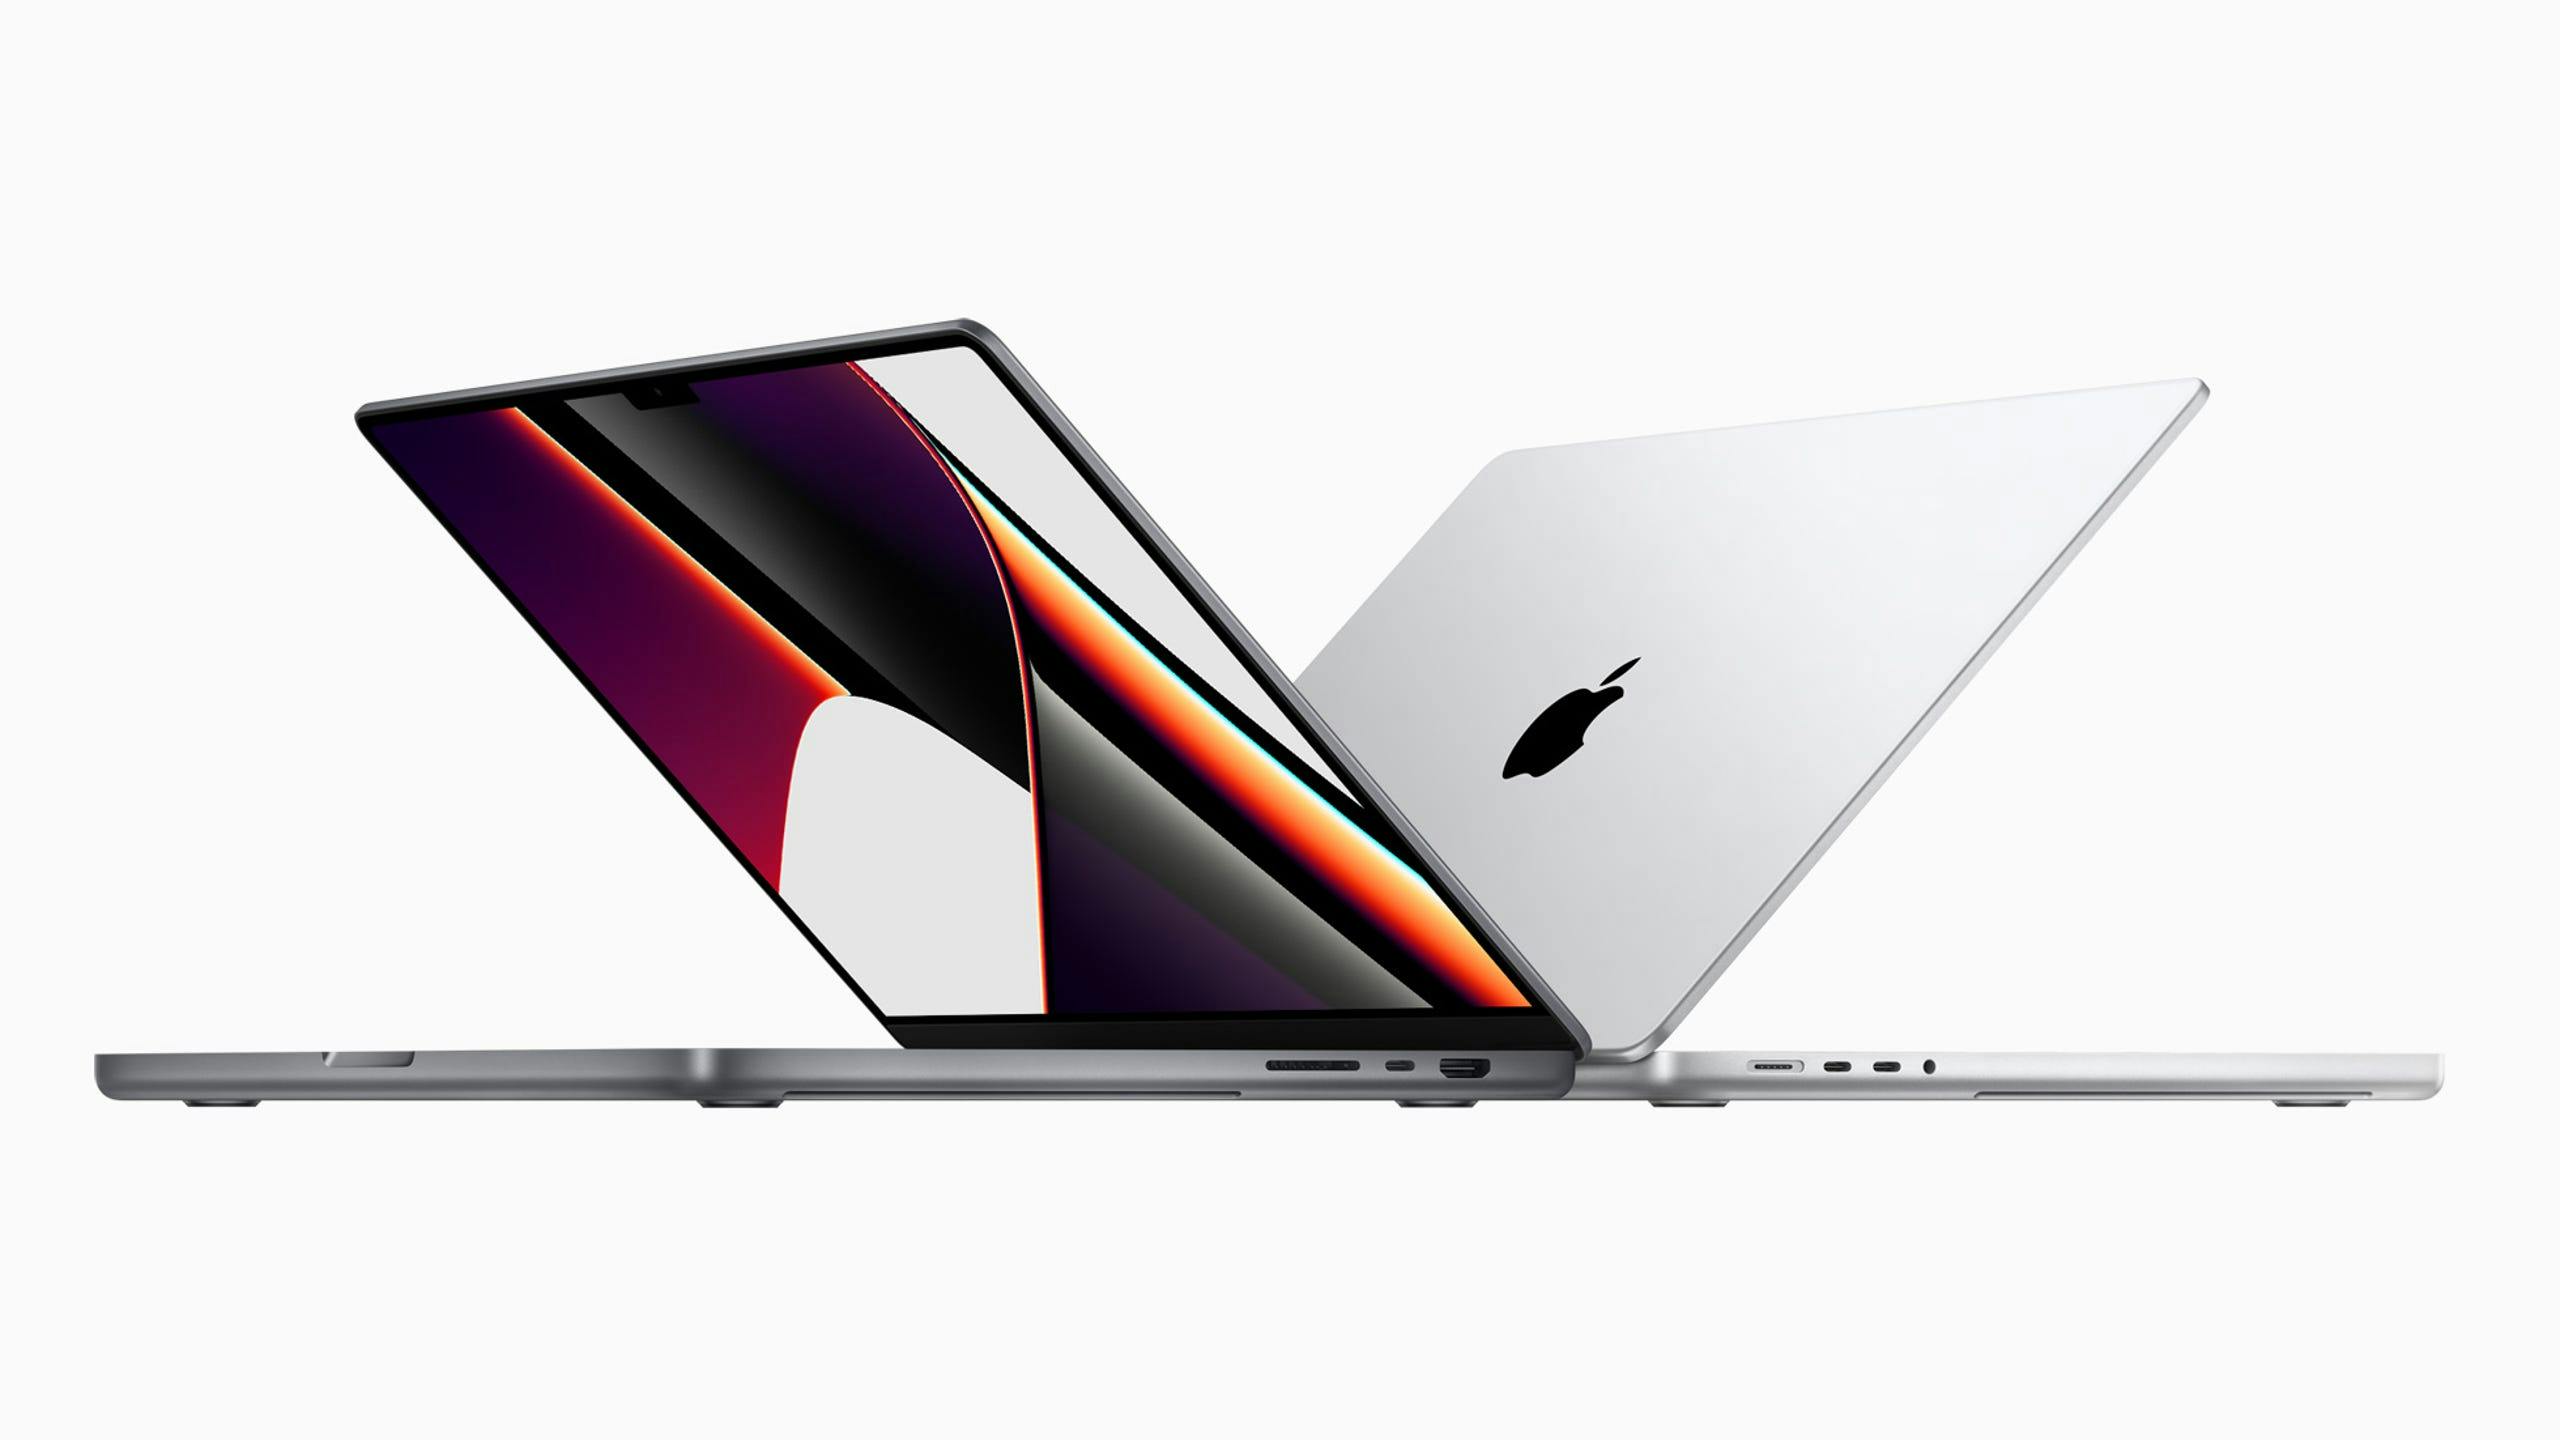 An image of two Apple MacBook Pros in space gray and silver.